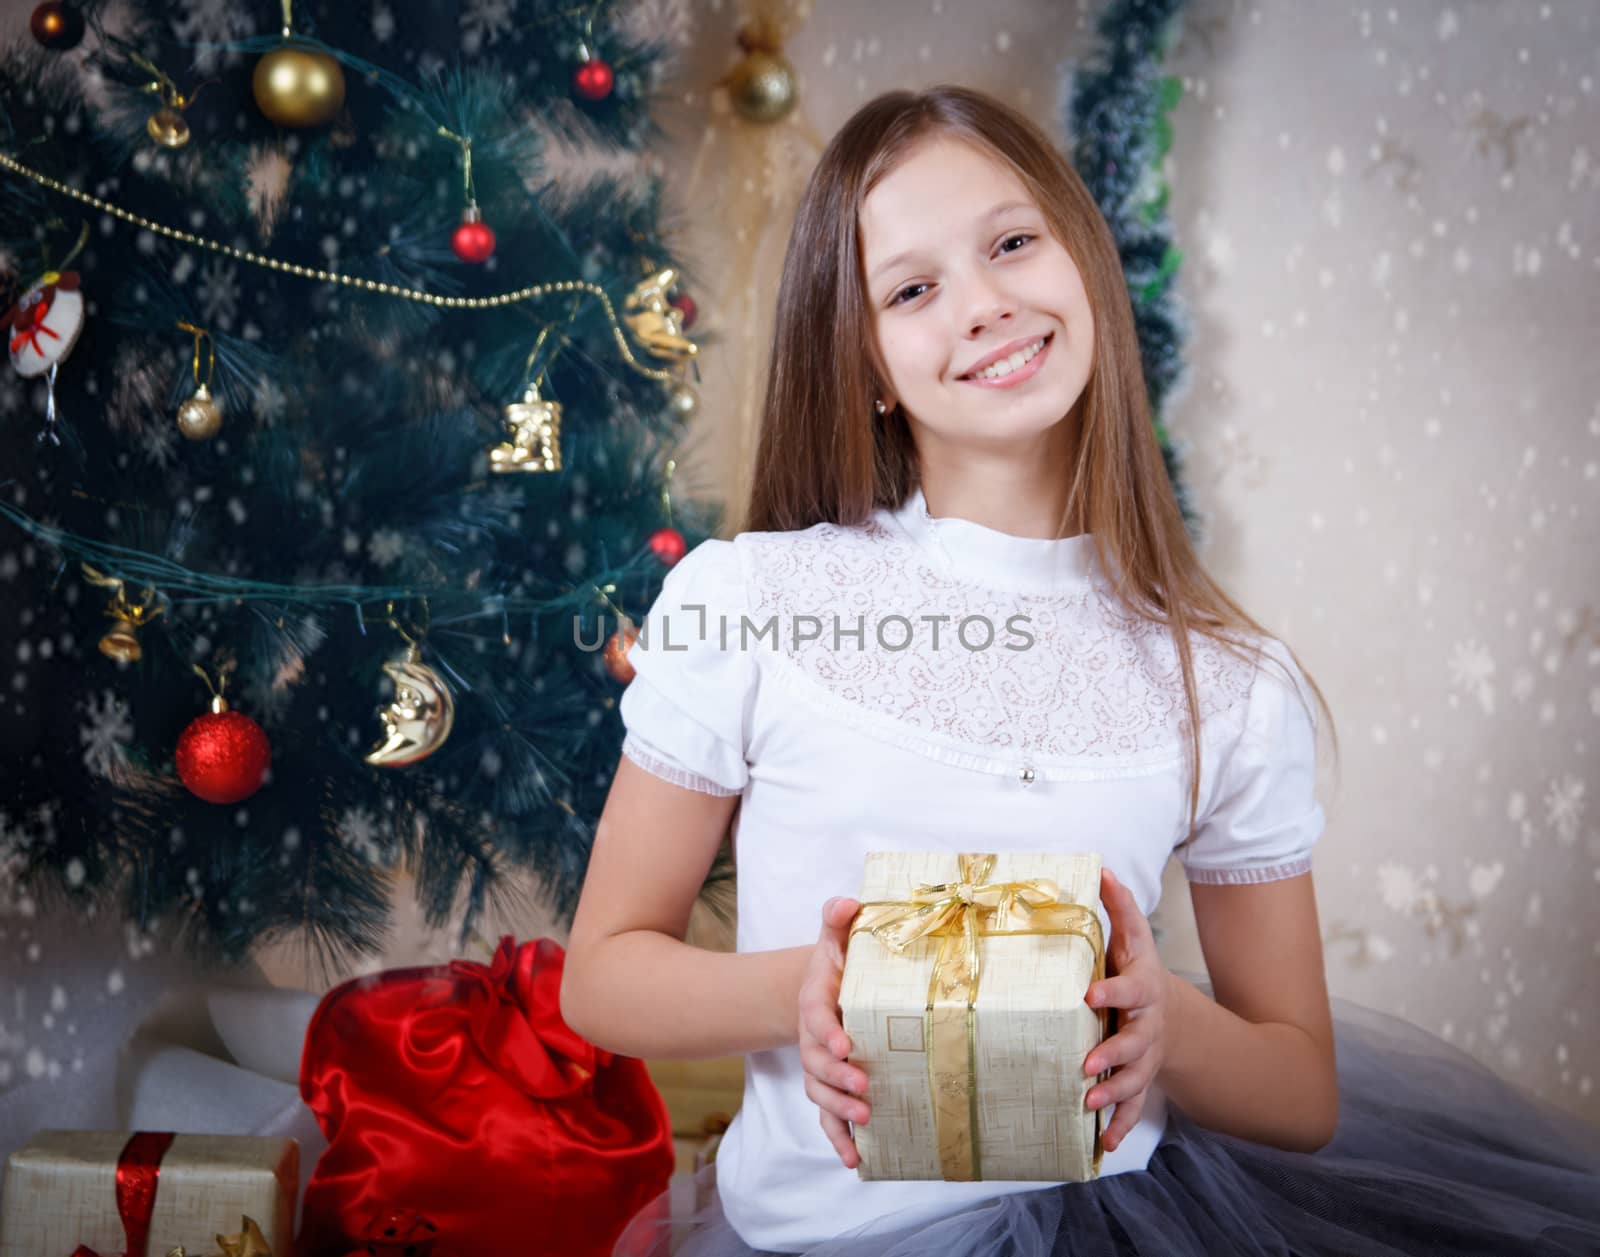 Girl holding gift box under Christmas tree by Angel_a